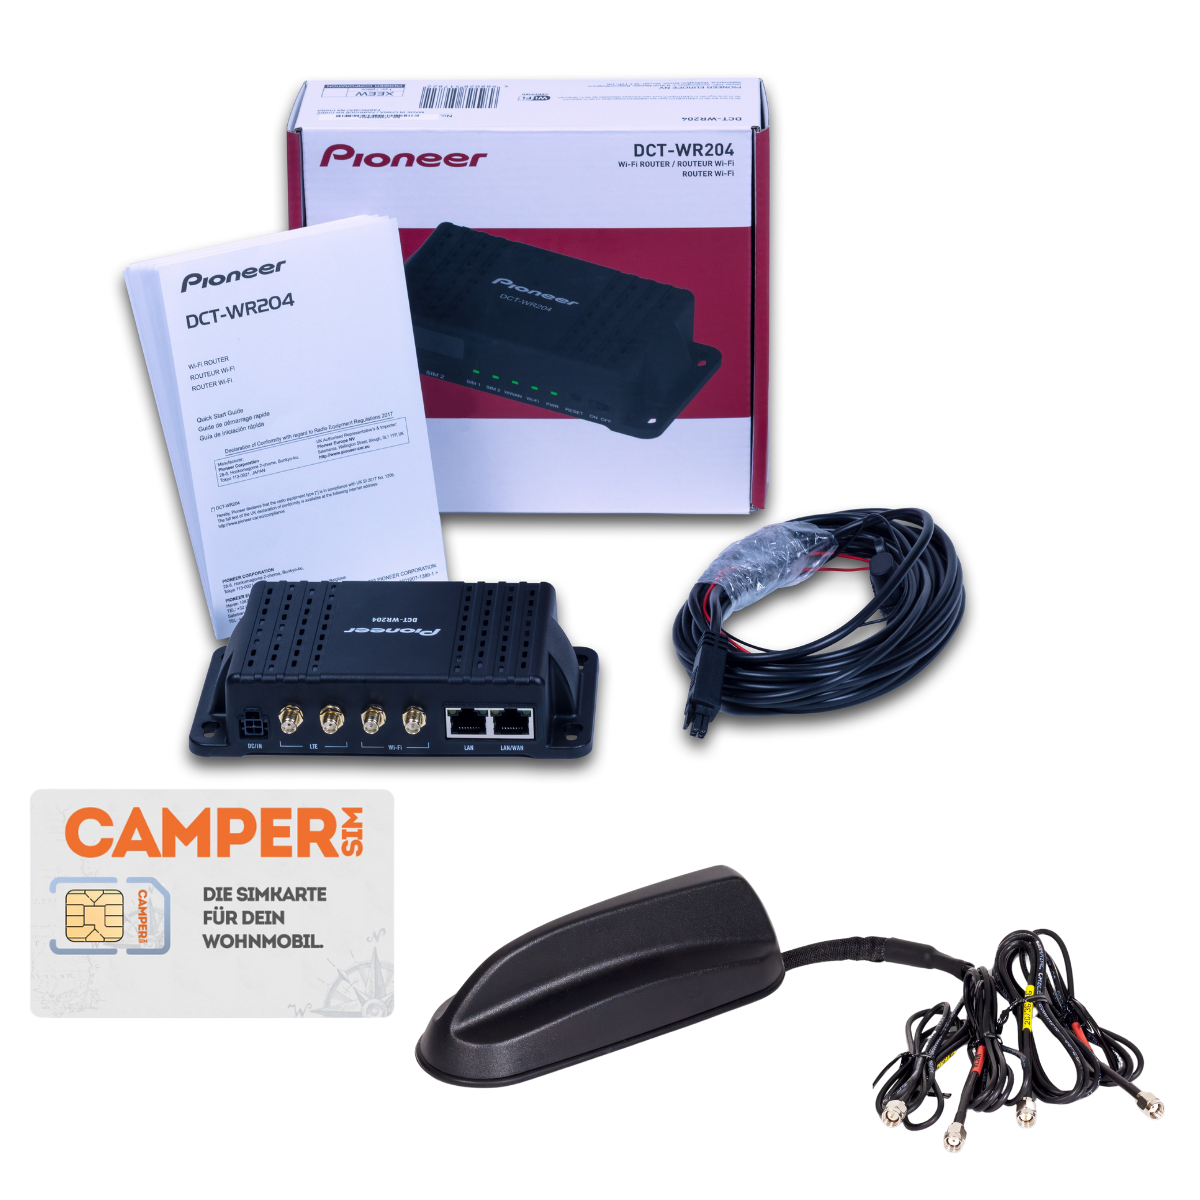 PIONEER WIFI-Router DCT-WR204-SH mit Dachantenne inkl. CAMPER SIM 10 GB Special Edition